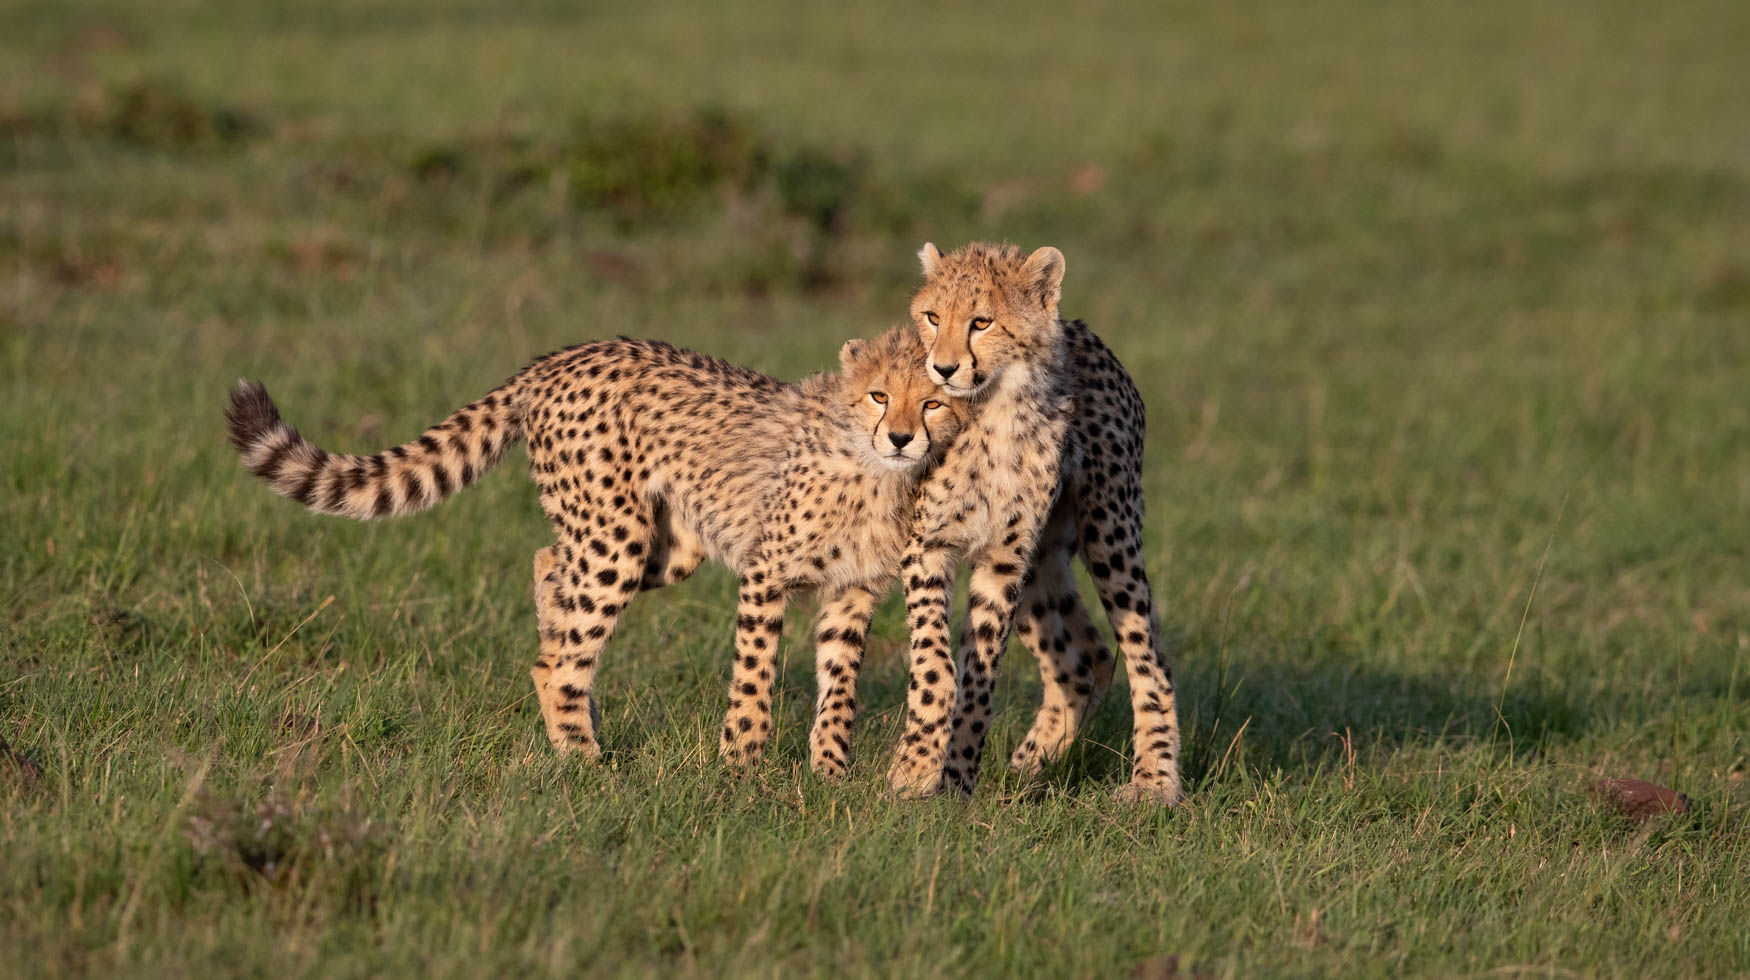 Some cheetah cubs embrace each other in the Serengeti in Tanzania.